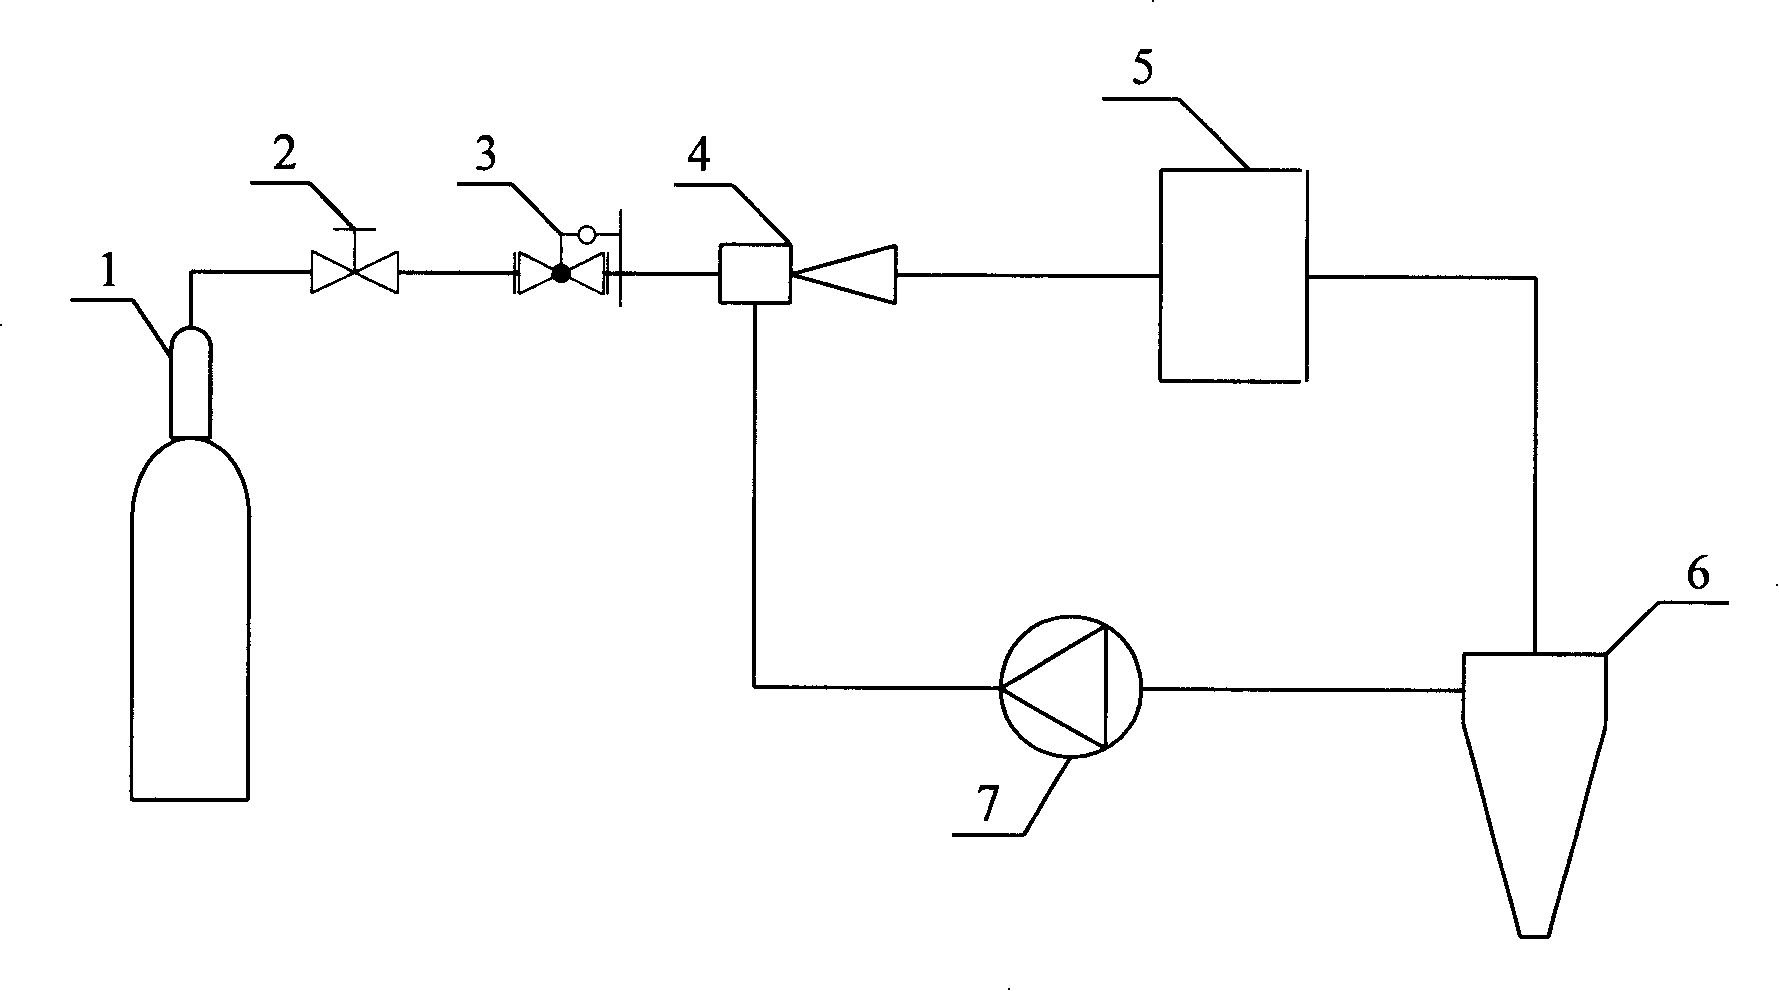 A fuel circulation method for fuel battery and special device